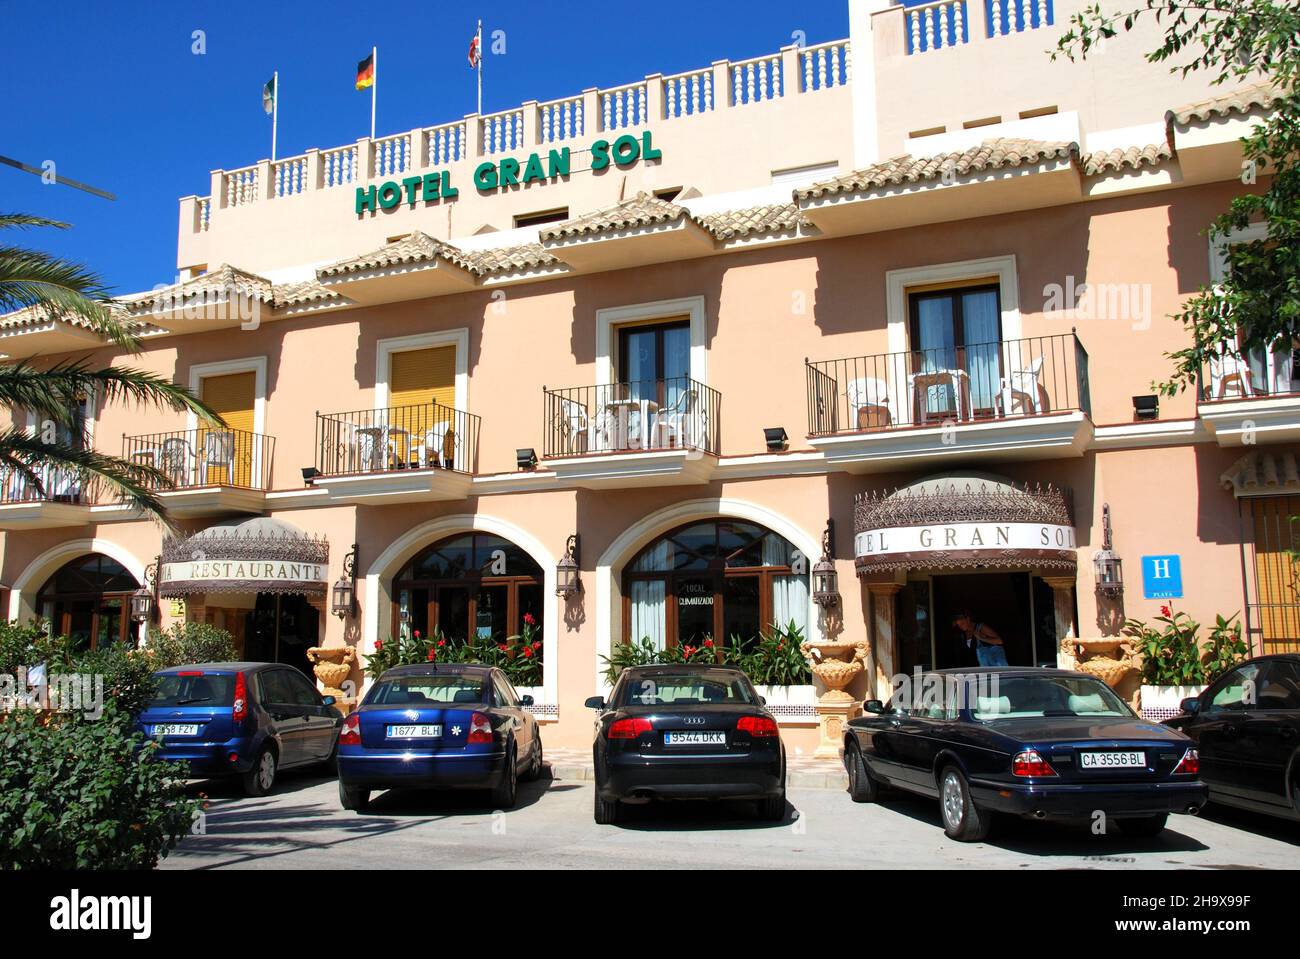 Front view of the Hotel Gran Sol, Zahara de los Atunes, Cadiz Province, Andalusia, Spain, Europe, Spain. Stock Photo